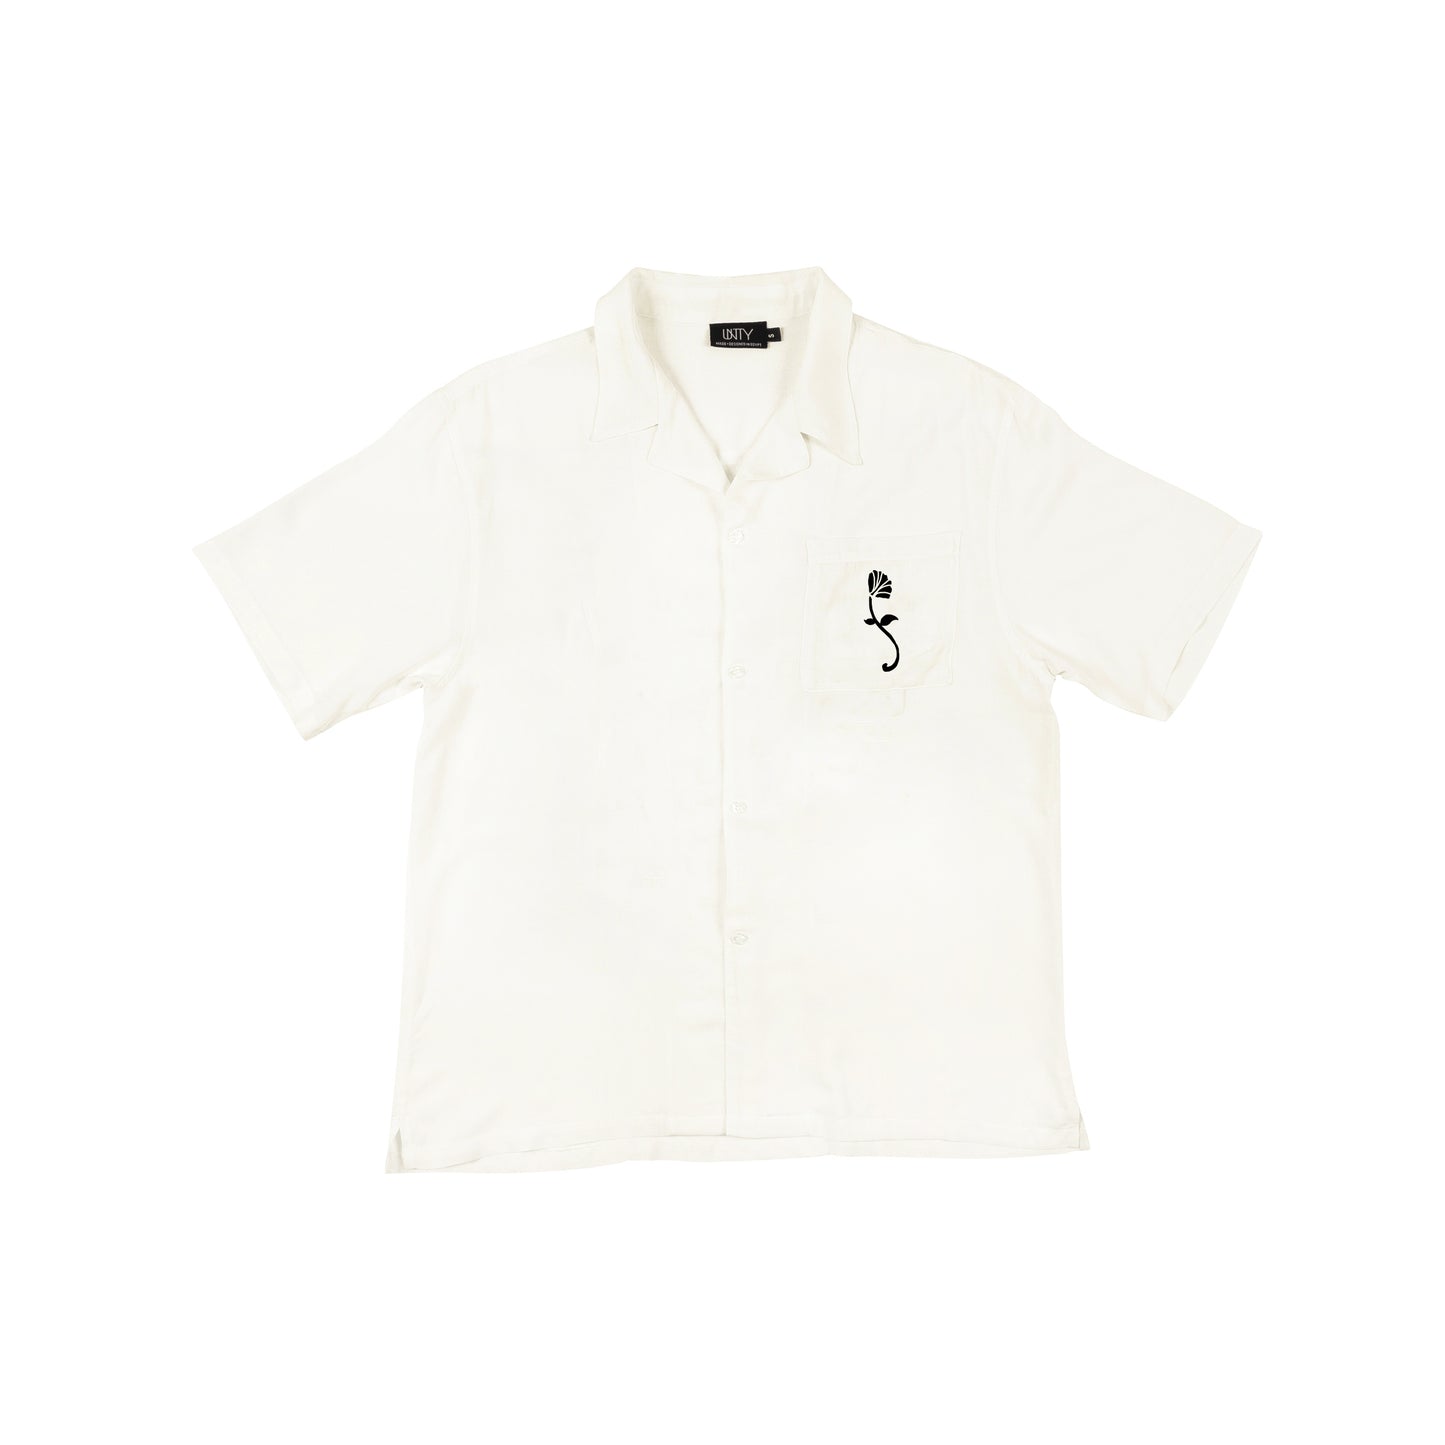 The Virtue and Vice Bowling Shirt